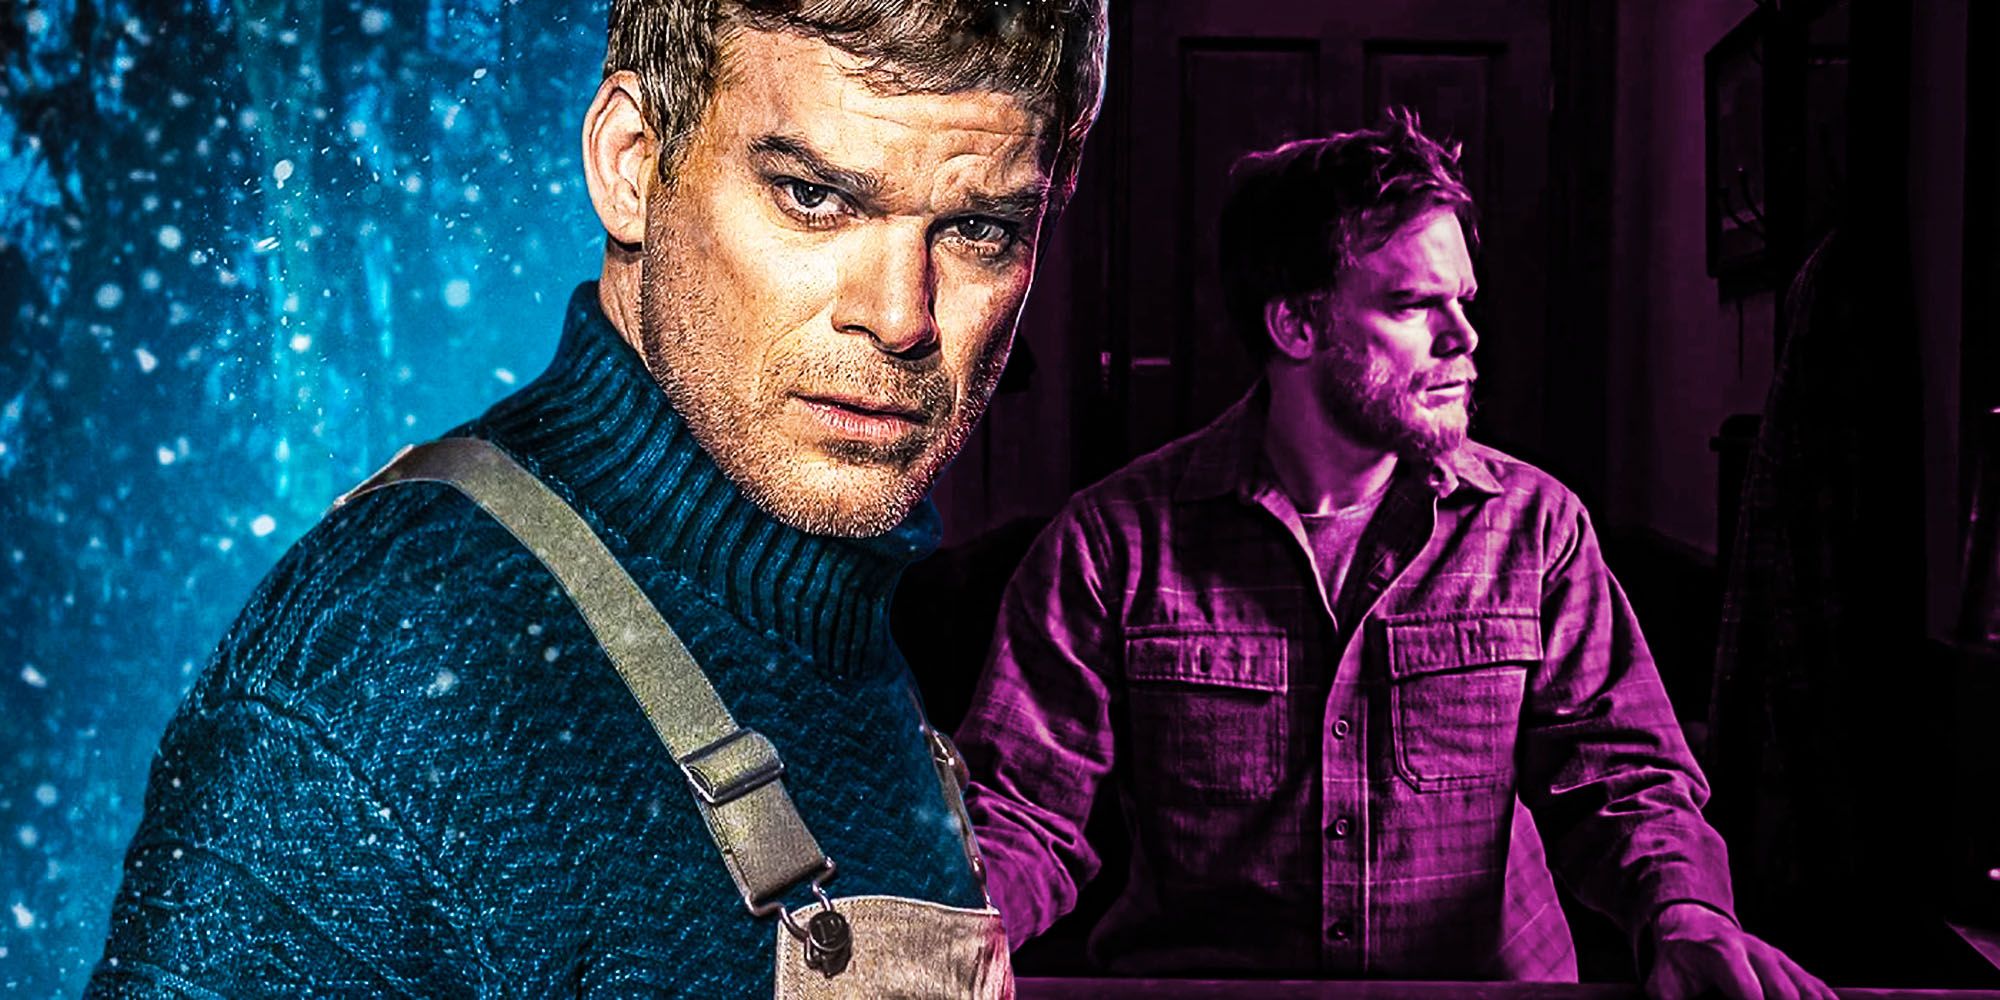 How many years between Dexter and New Blood?